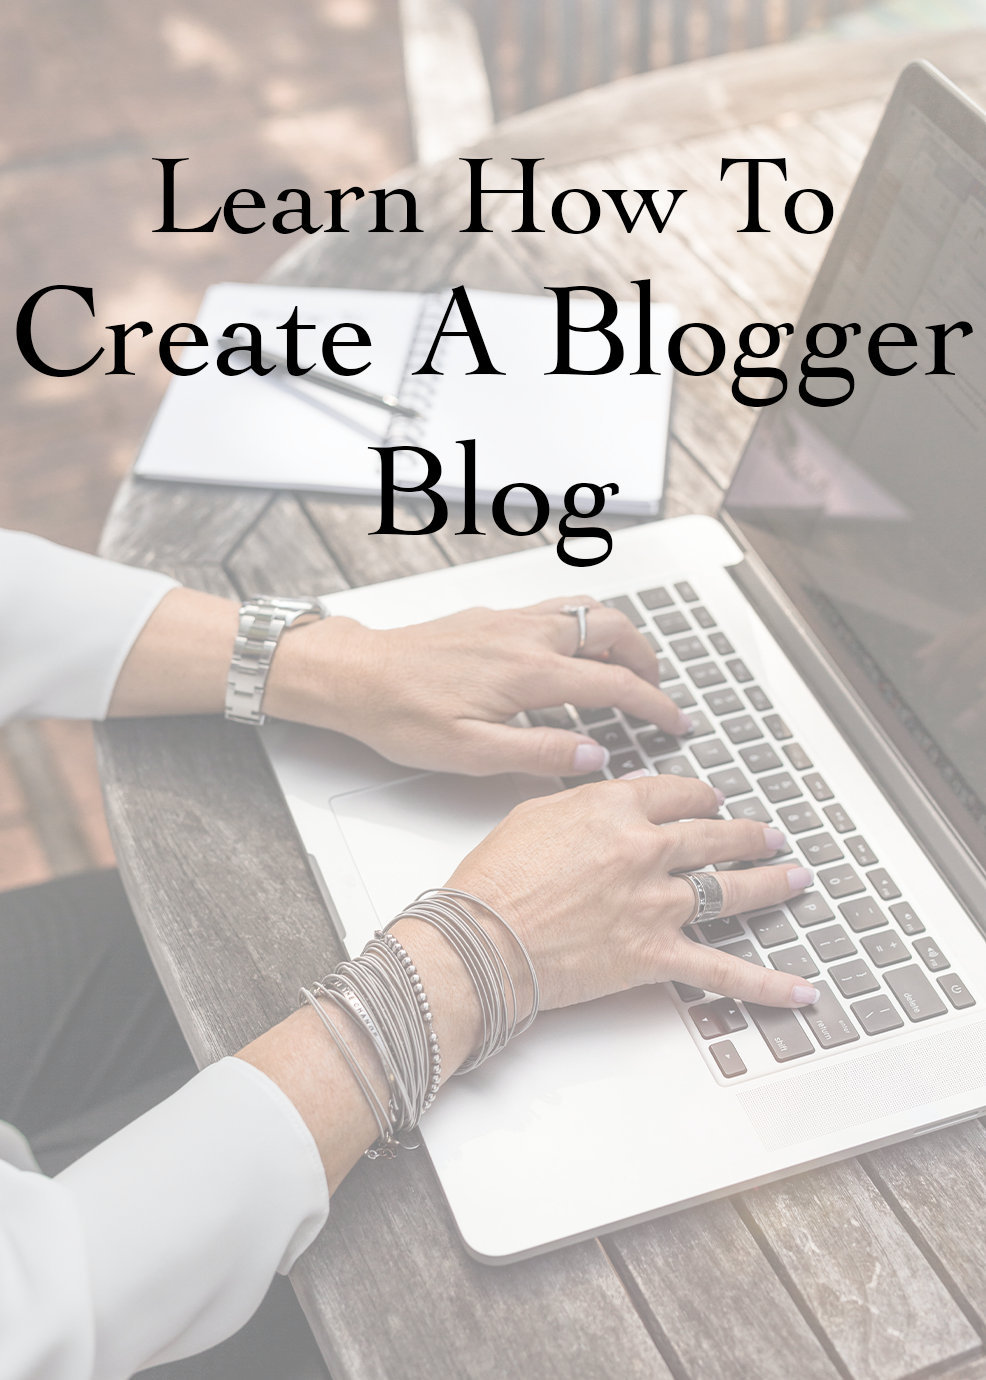 Learn How To Create A Blogger Blog